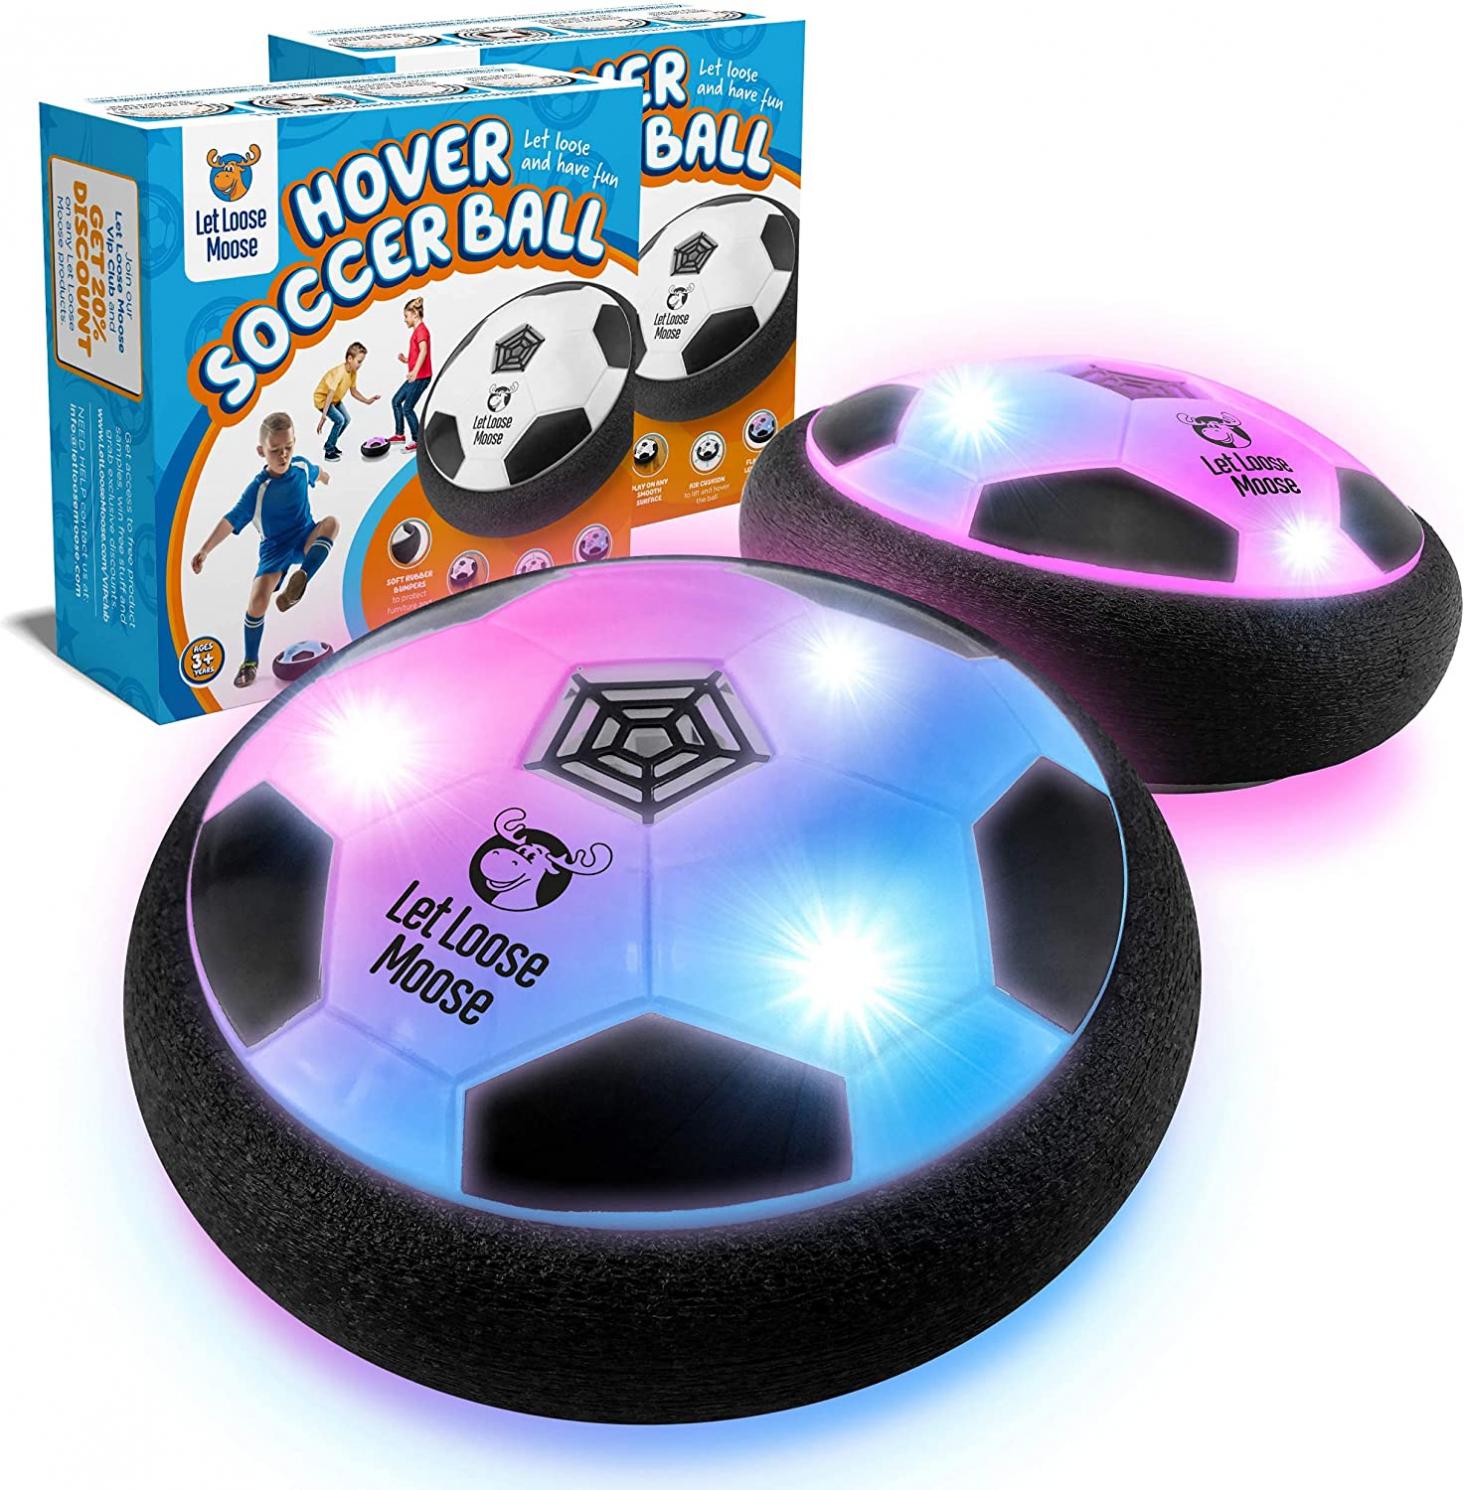 LLMoose Hover Soccer Ball - Set of 2 LED Hover Ball Toys w/ Foam Bumpers - Light Up Indoor Soccer Ball for Rainy Days or Outdoor Play - Soccer Stuff for Boys and Girls - Gifts for Toddlers and Kids